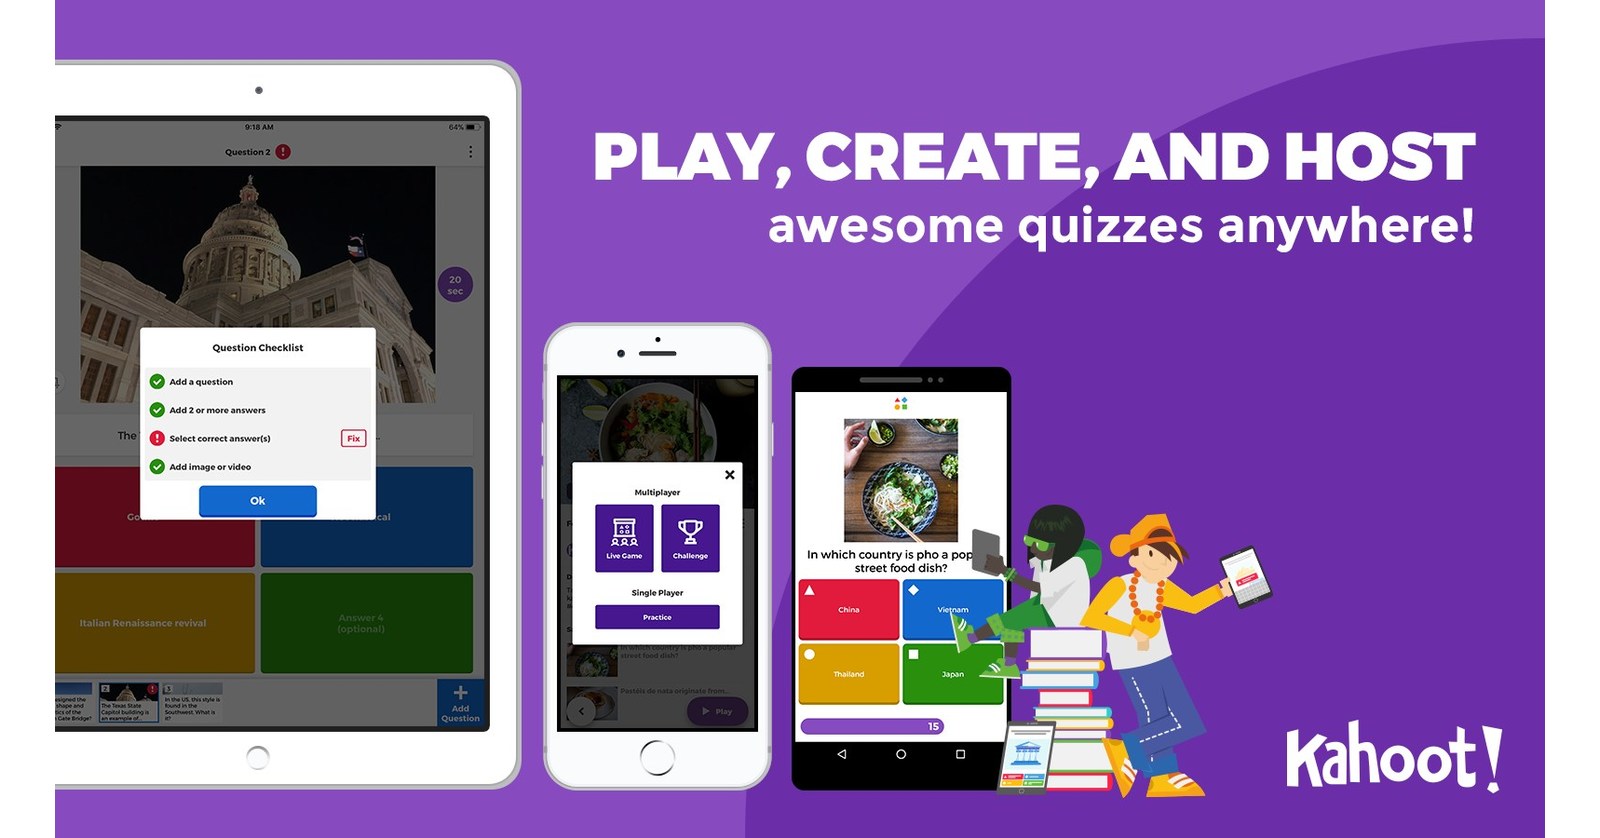 Kahoot Launches In App Quiz Creation And Hosting Tools To Turn Students From Learners Into Leaders